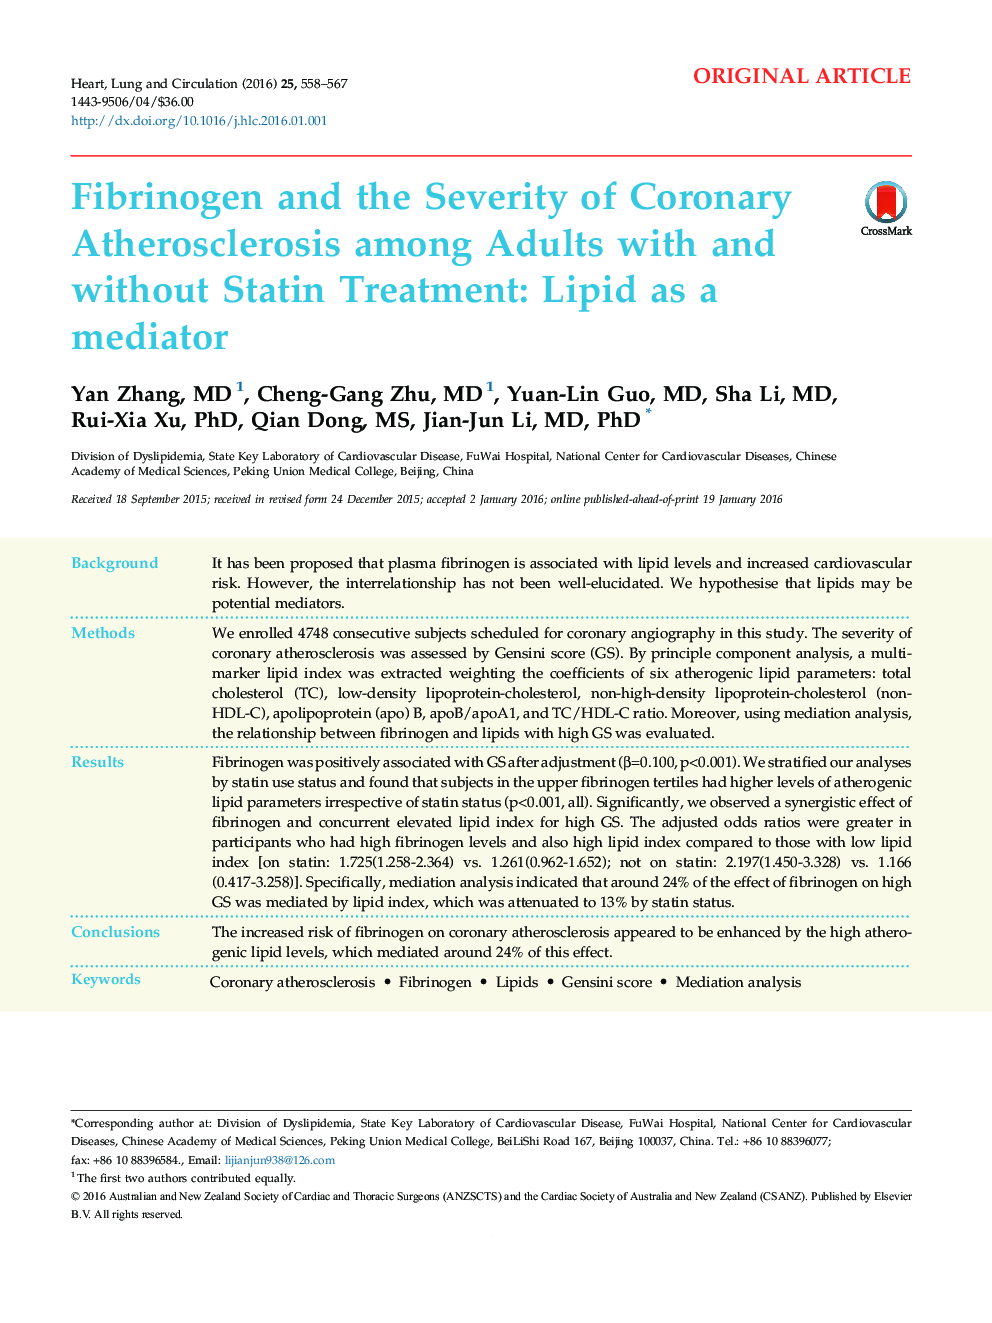 Fibrinogen and the Severity of Coronary Atherosclerosis among Adults with and without Statin Treatment: Lipid as a mediator